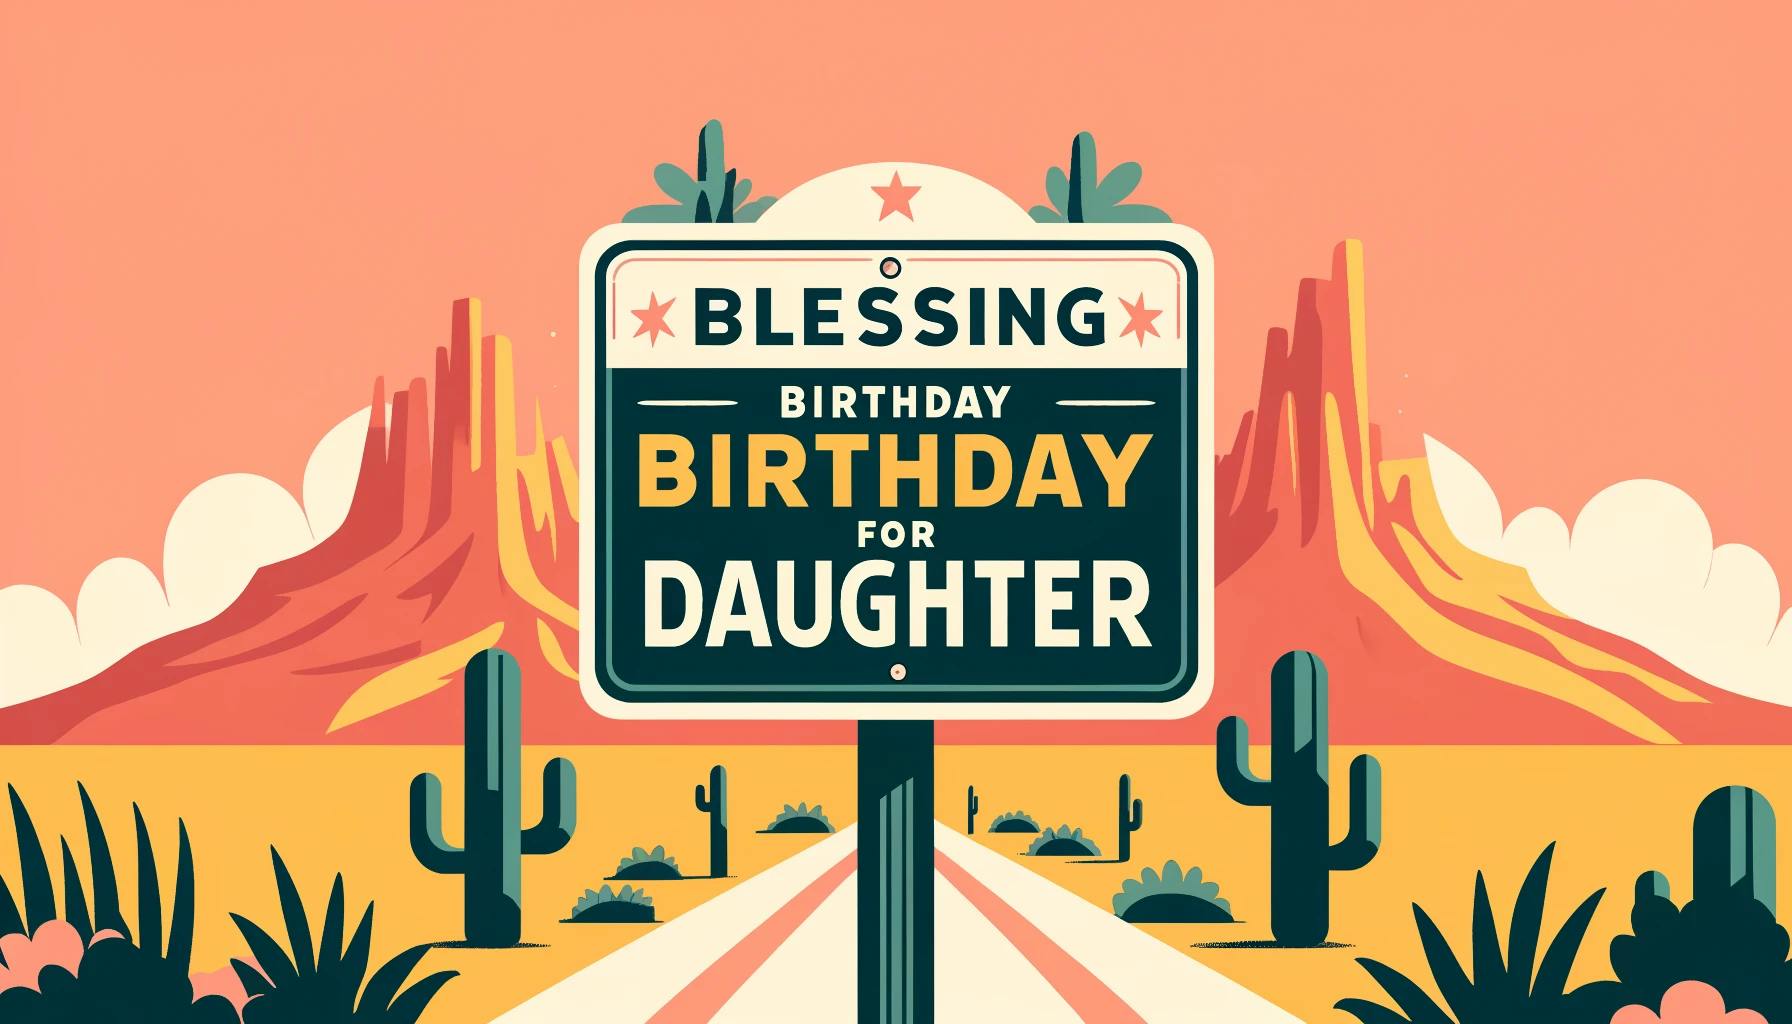 Poster image for 25 Unique Blessing Birthday Wishes for your Daughter